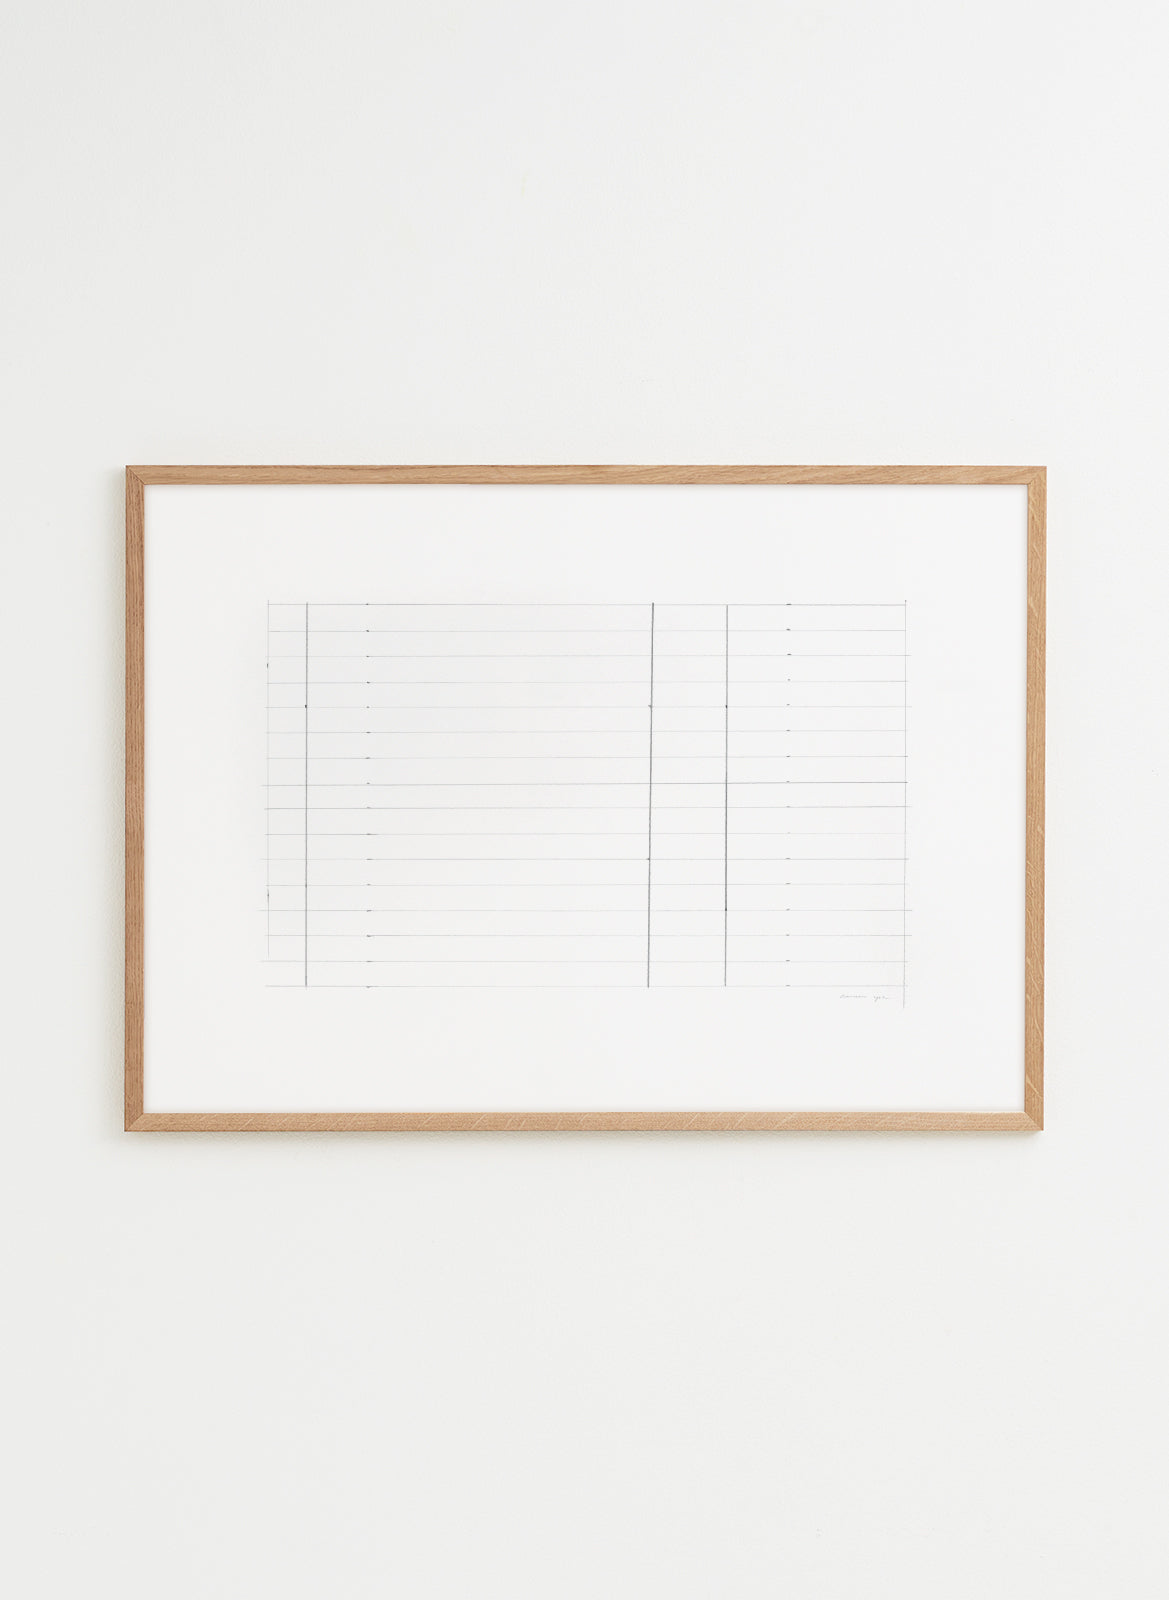 Minimalistic pencil line drawing poster made by atelier cph